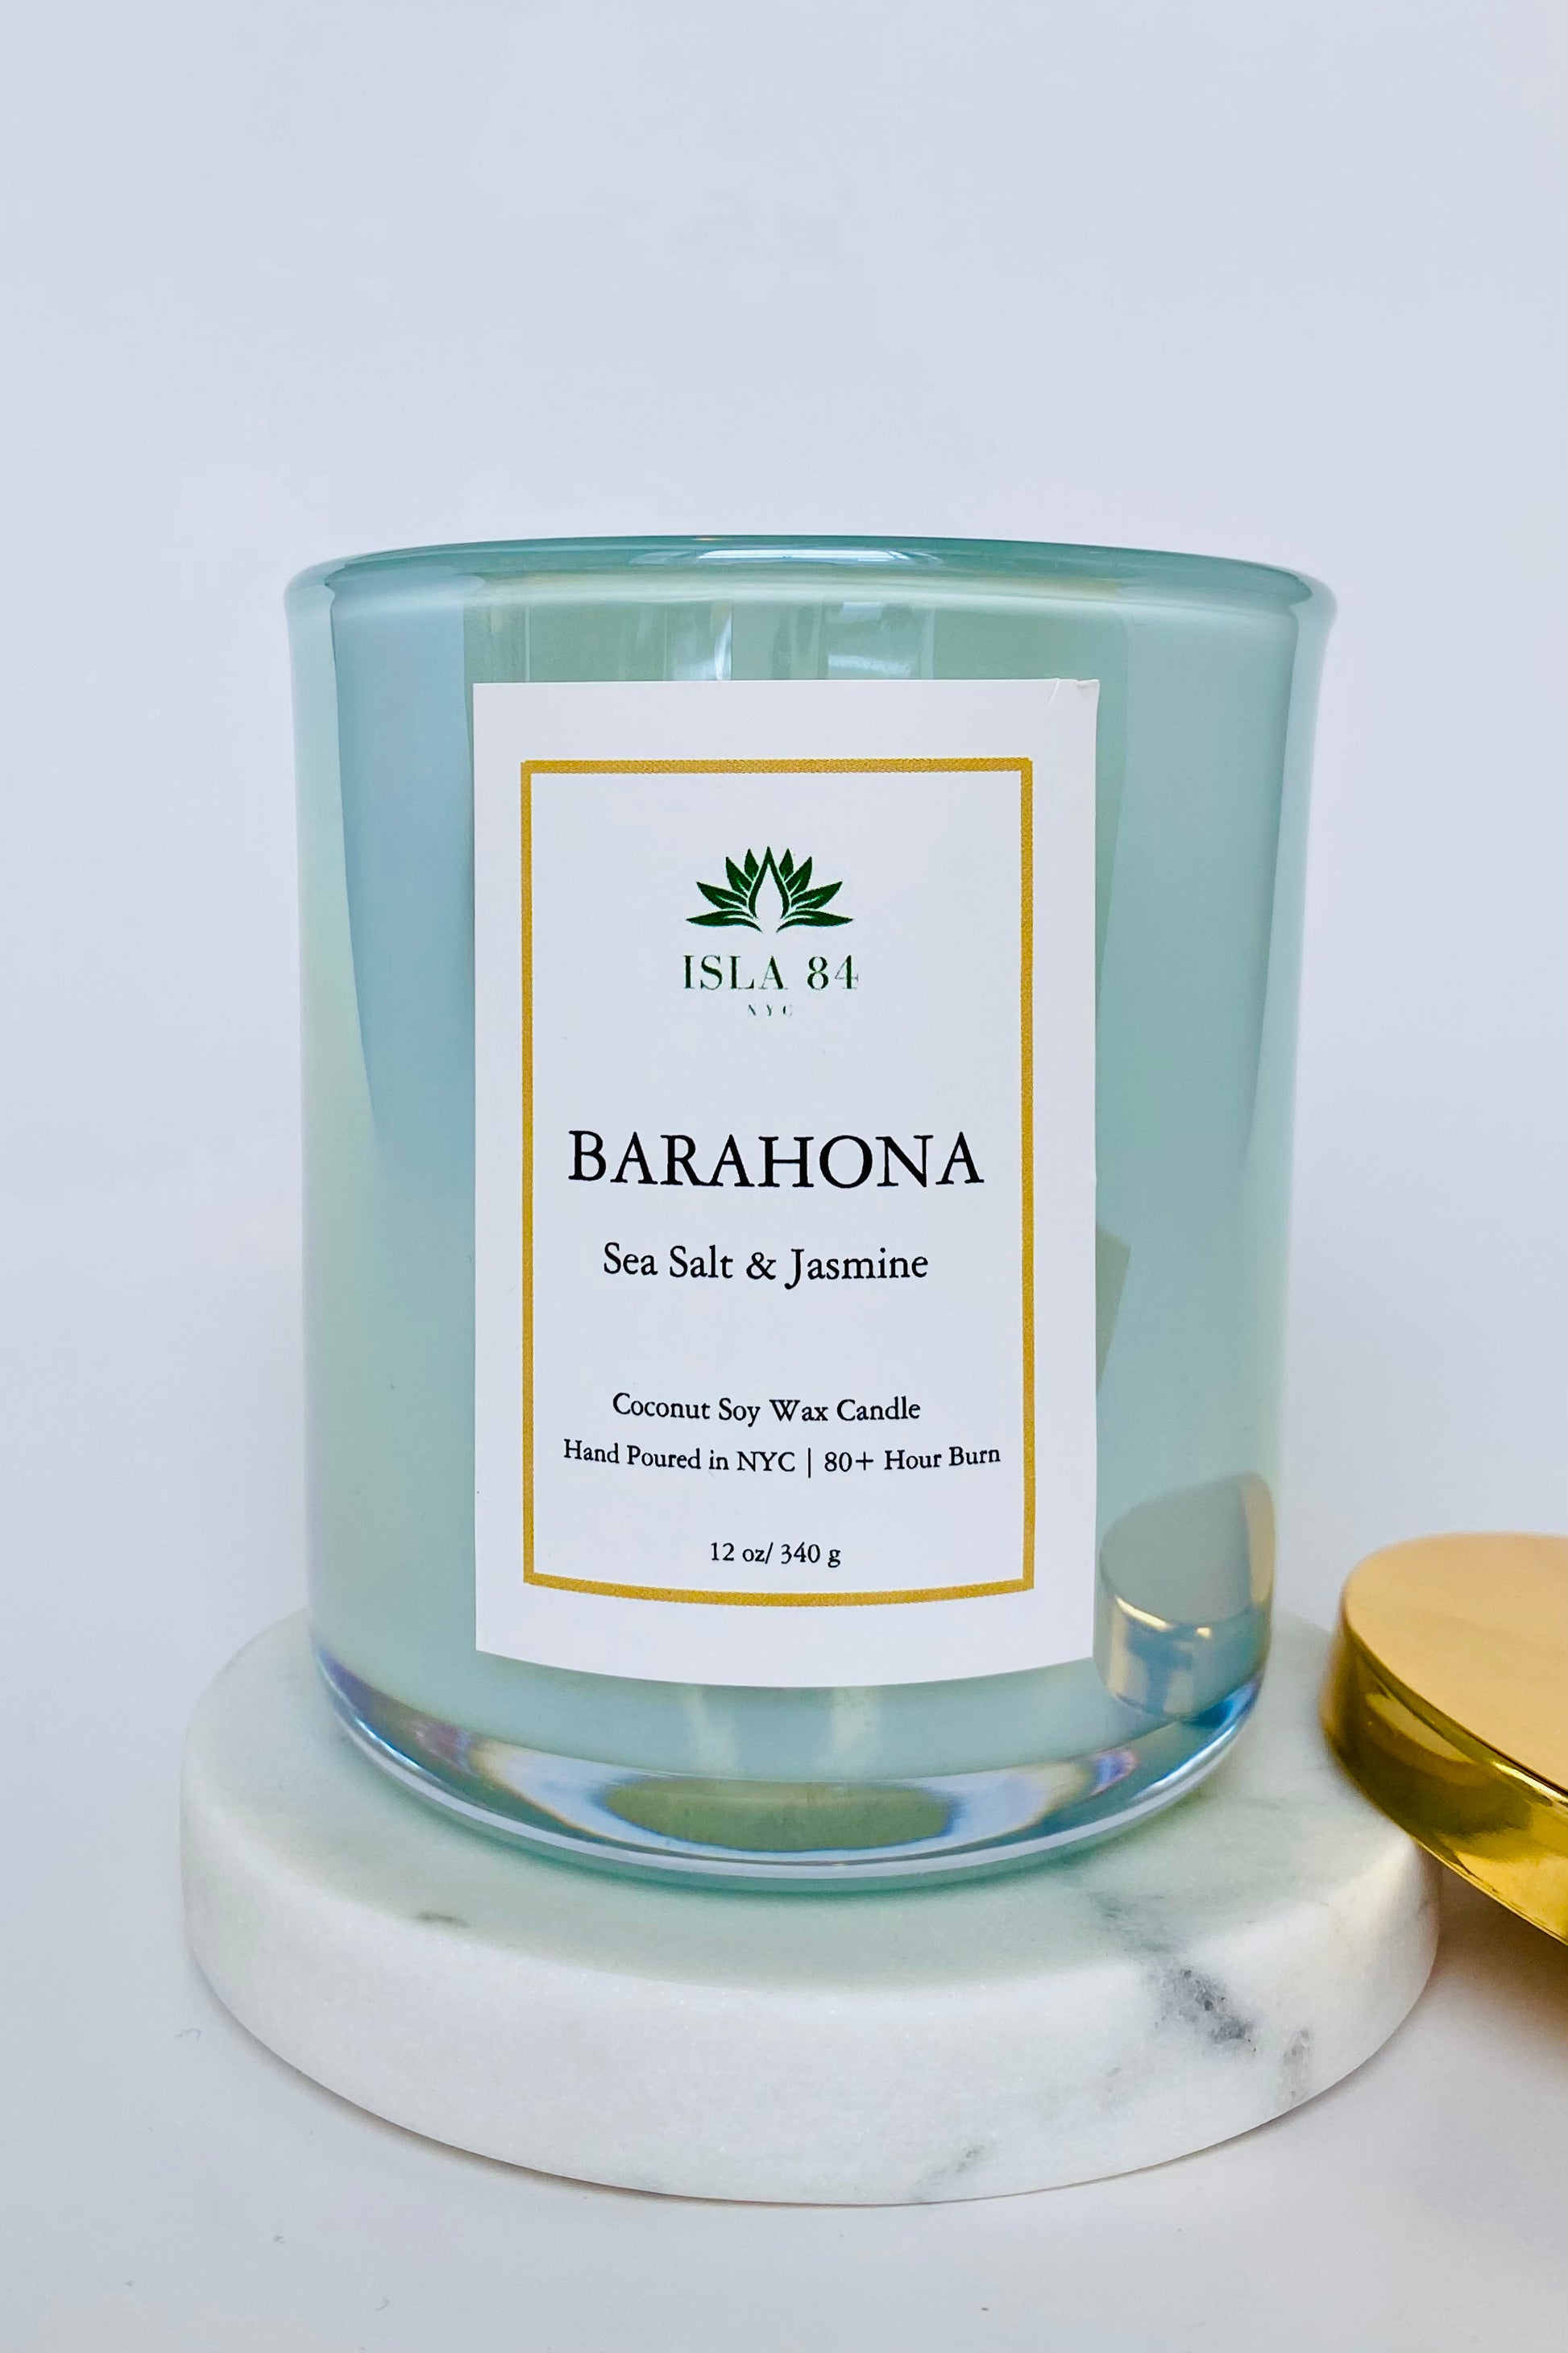 Barahona Signature Scented Candle; Dominican Republic Candles; Coconut Soy Wax Candle with Wood Wick